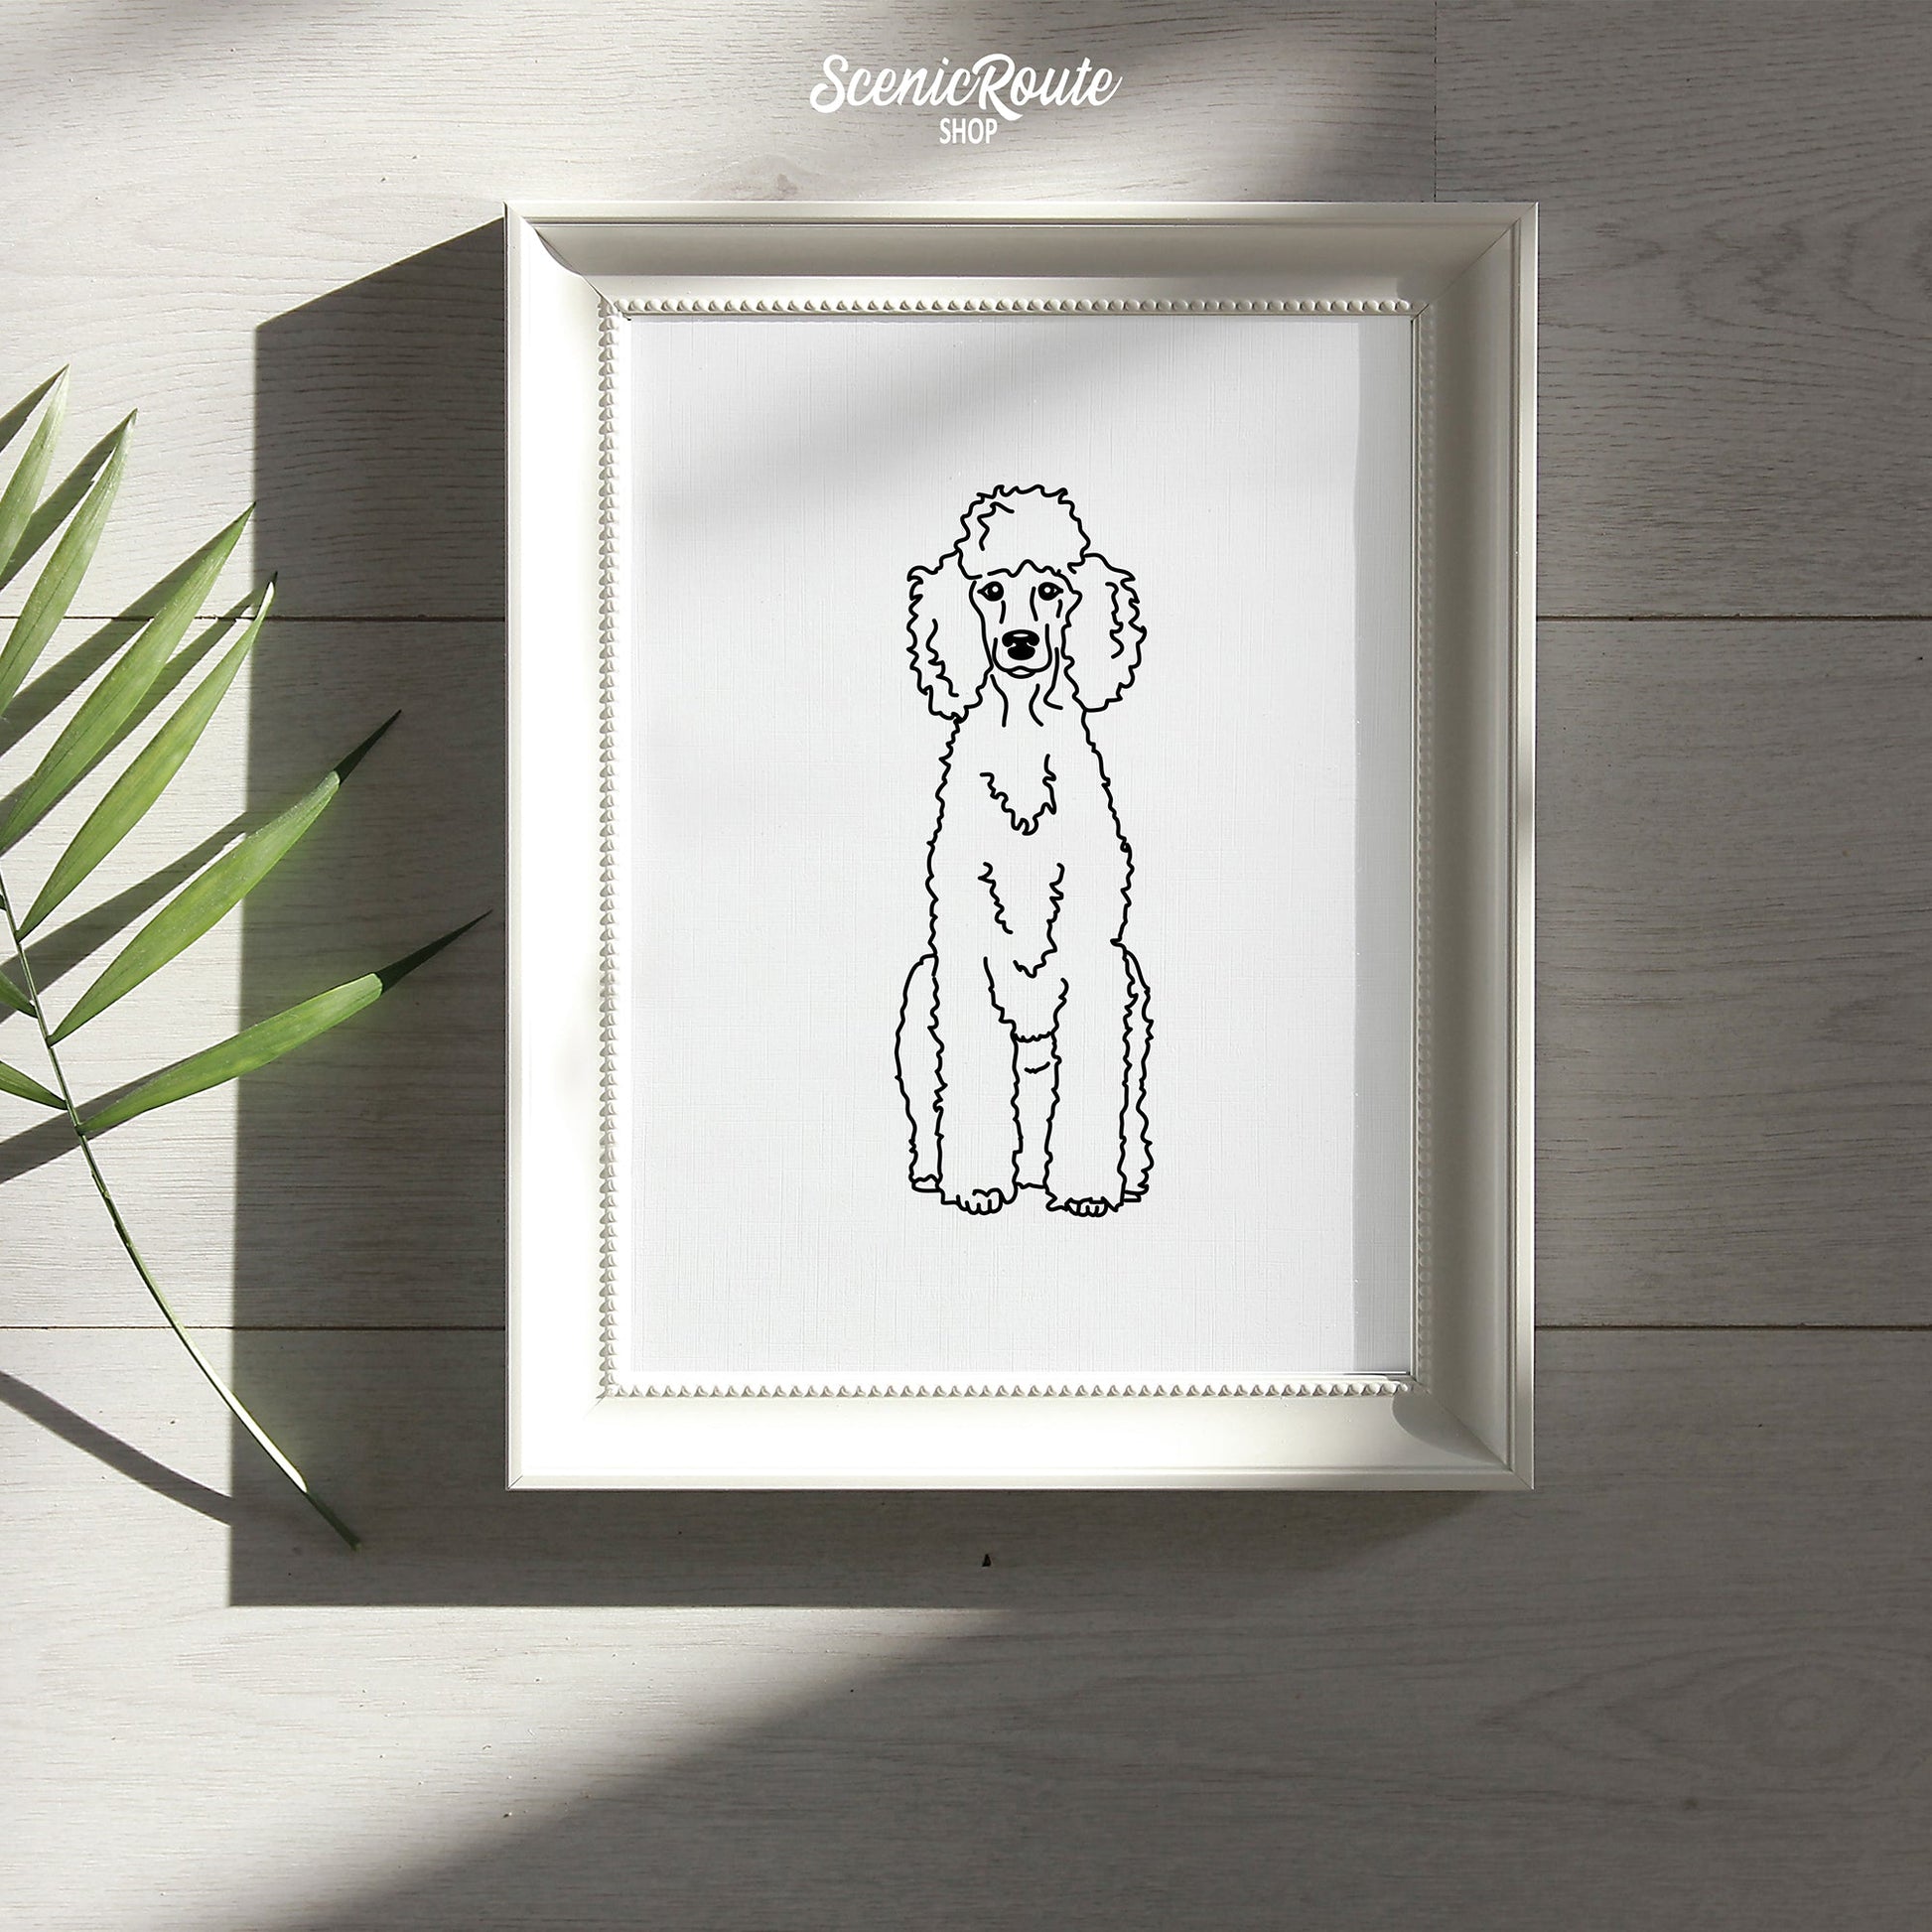 A framed line art drawing of a Poodle dog on a wood table with a palm leaf